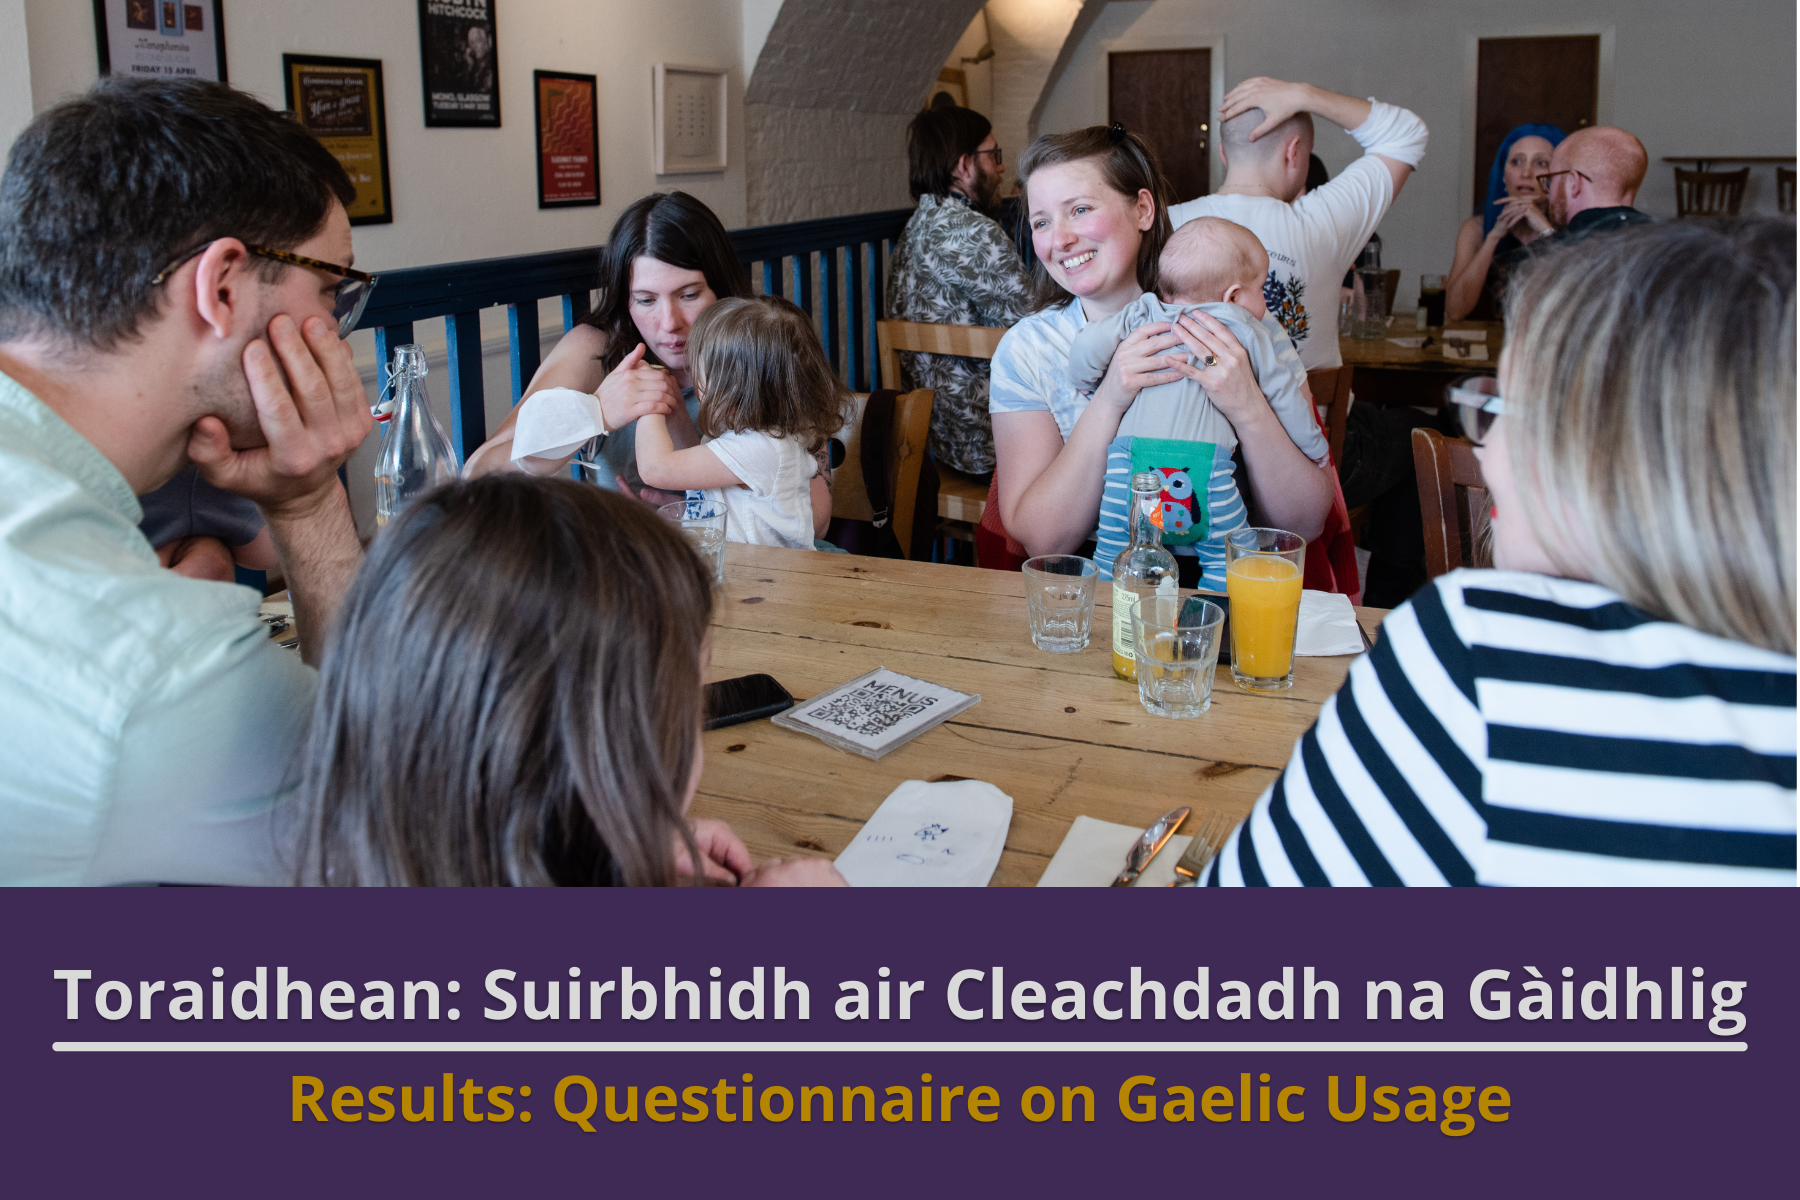 Results from the Gaelic Usage Survey